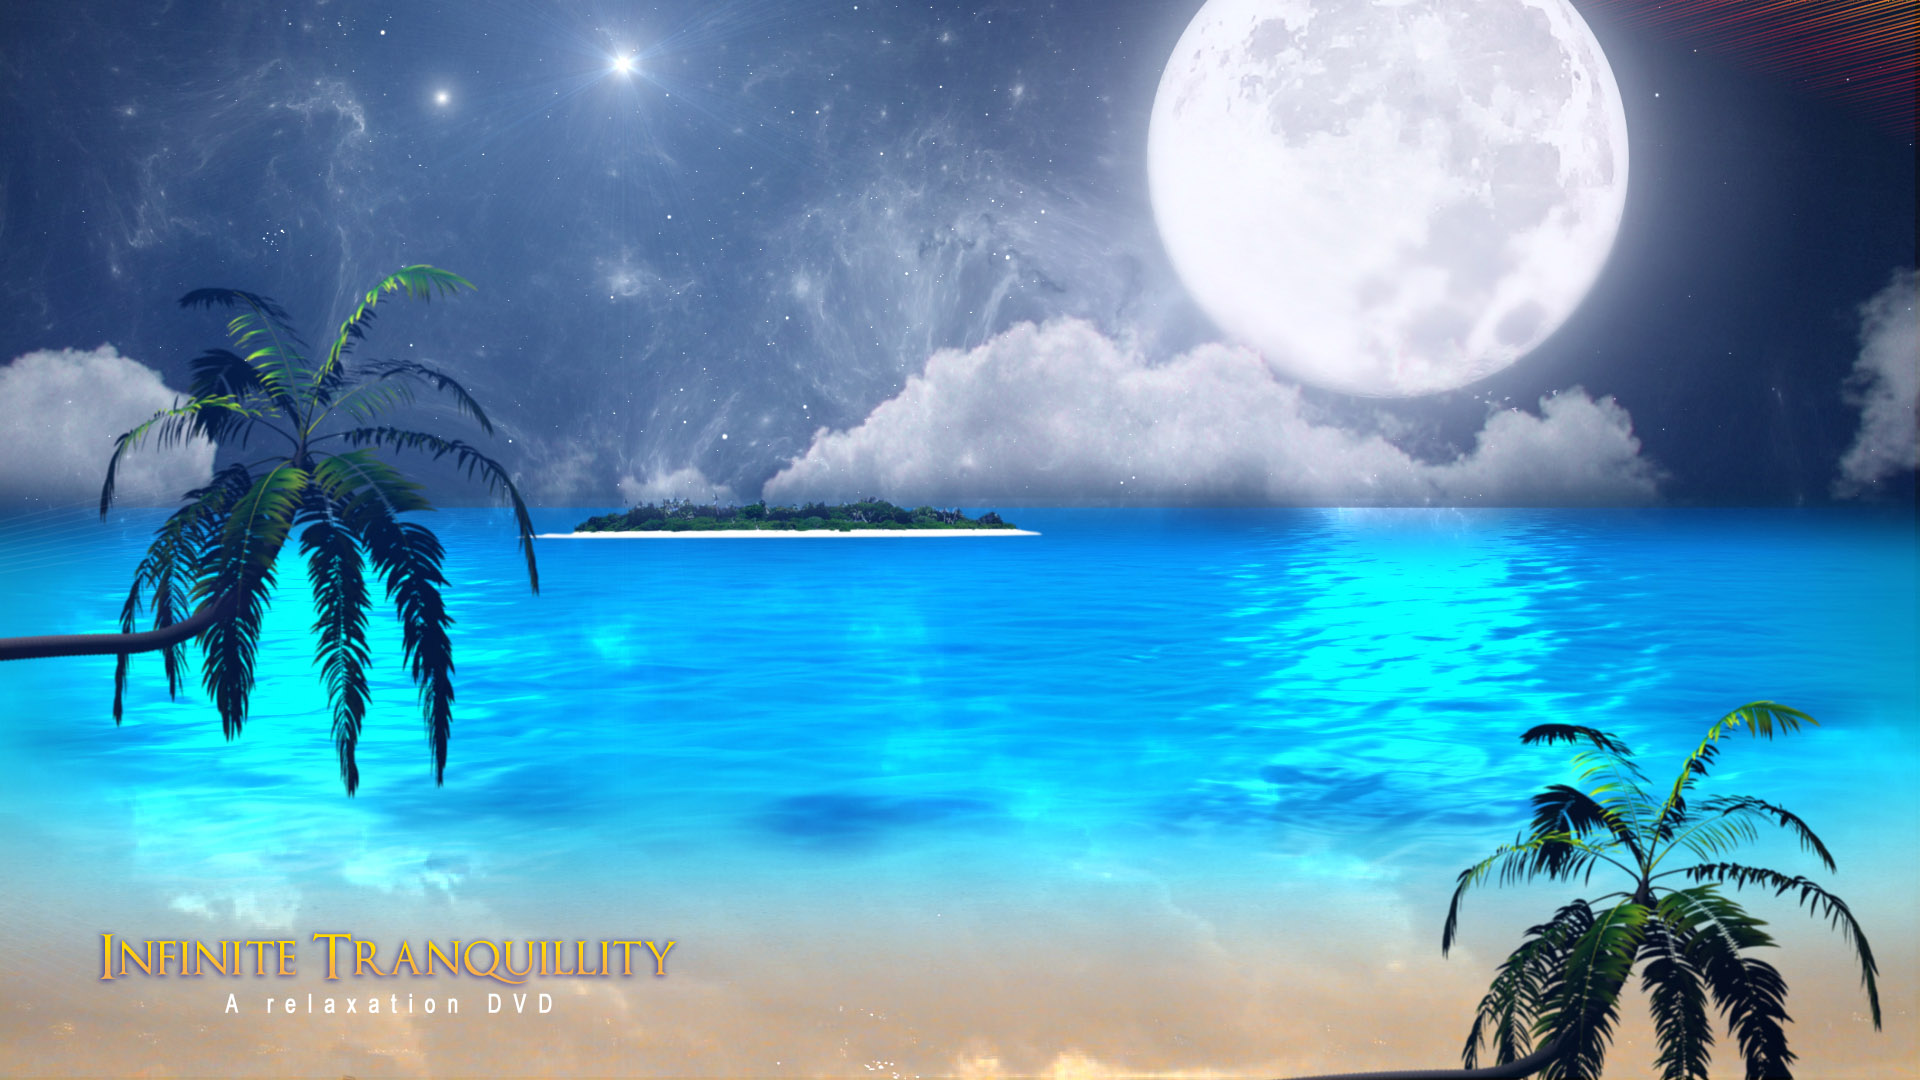 Infinite Tranquillity HD Relaxation Wallpaper